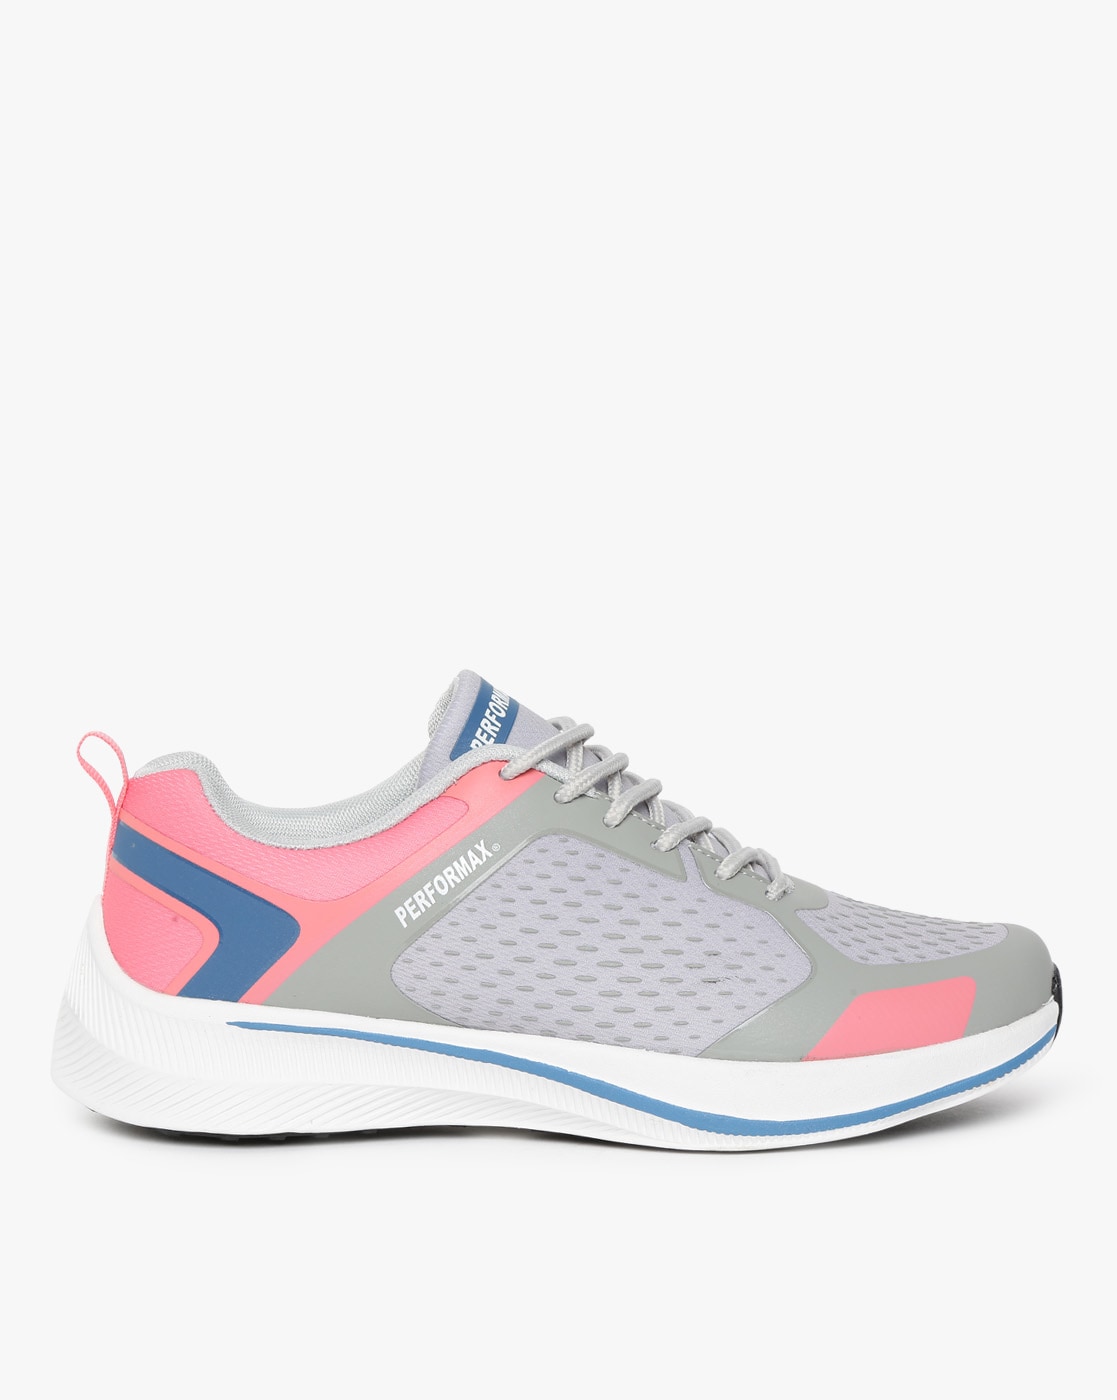 Buy Grey Sports Shoes for Women by 